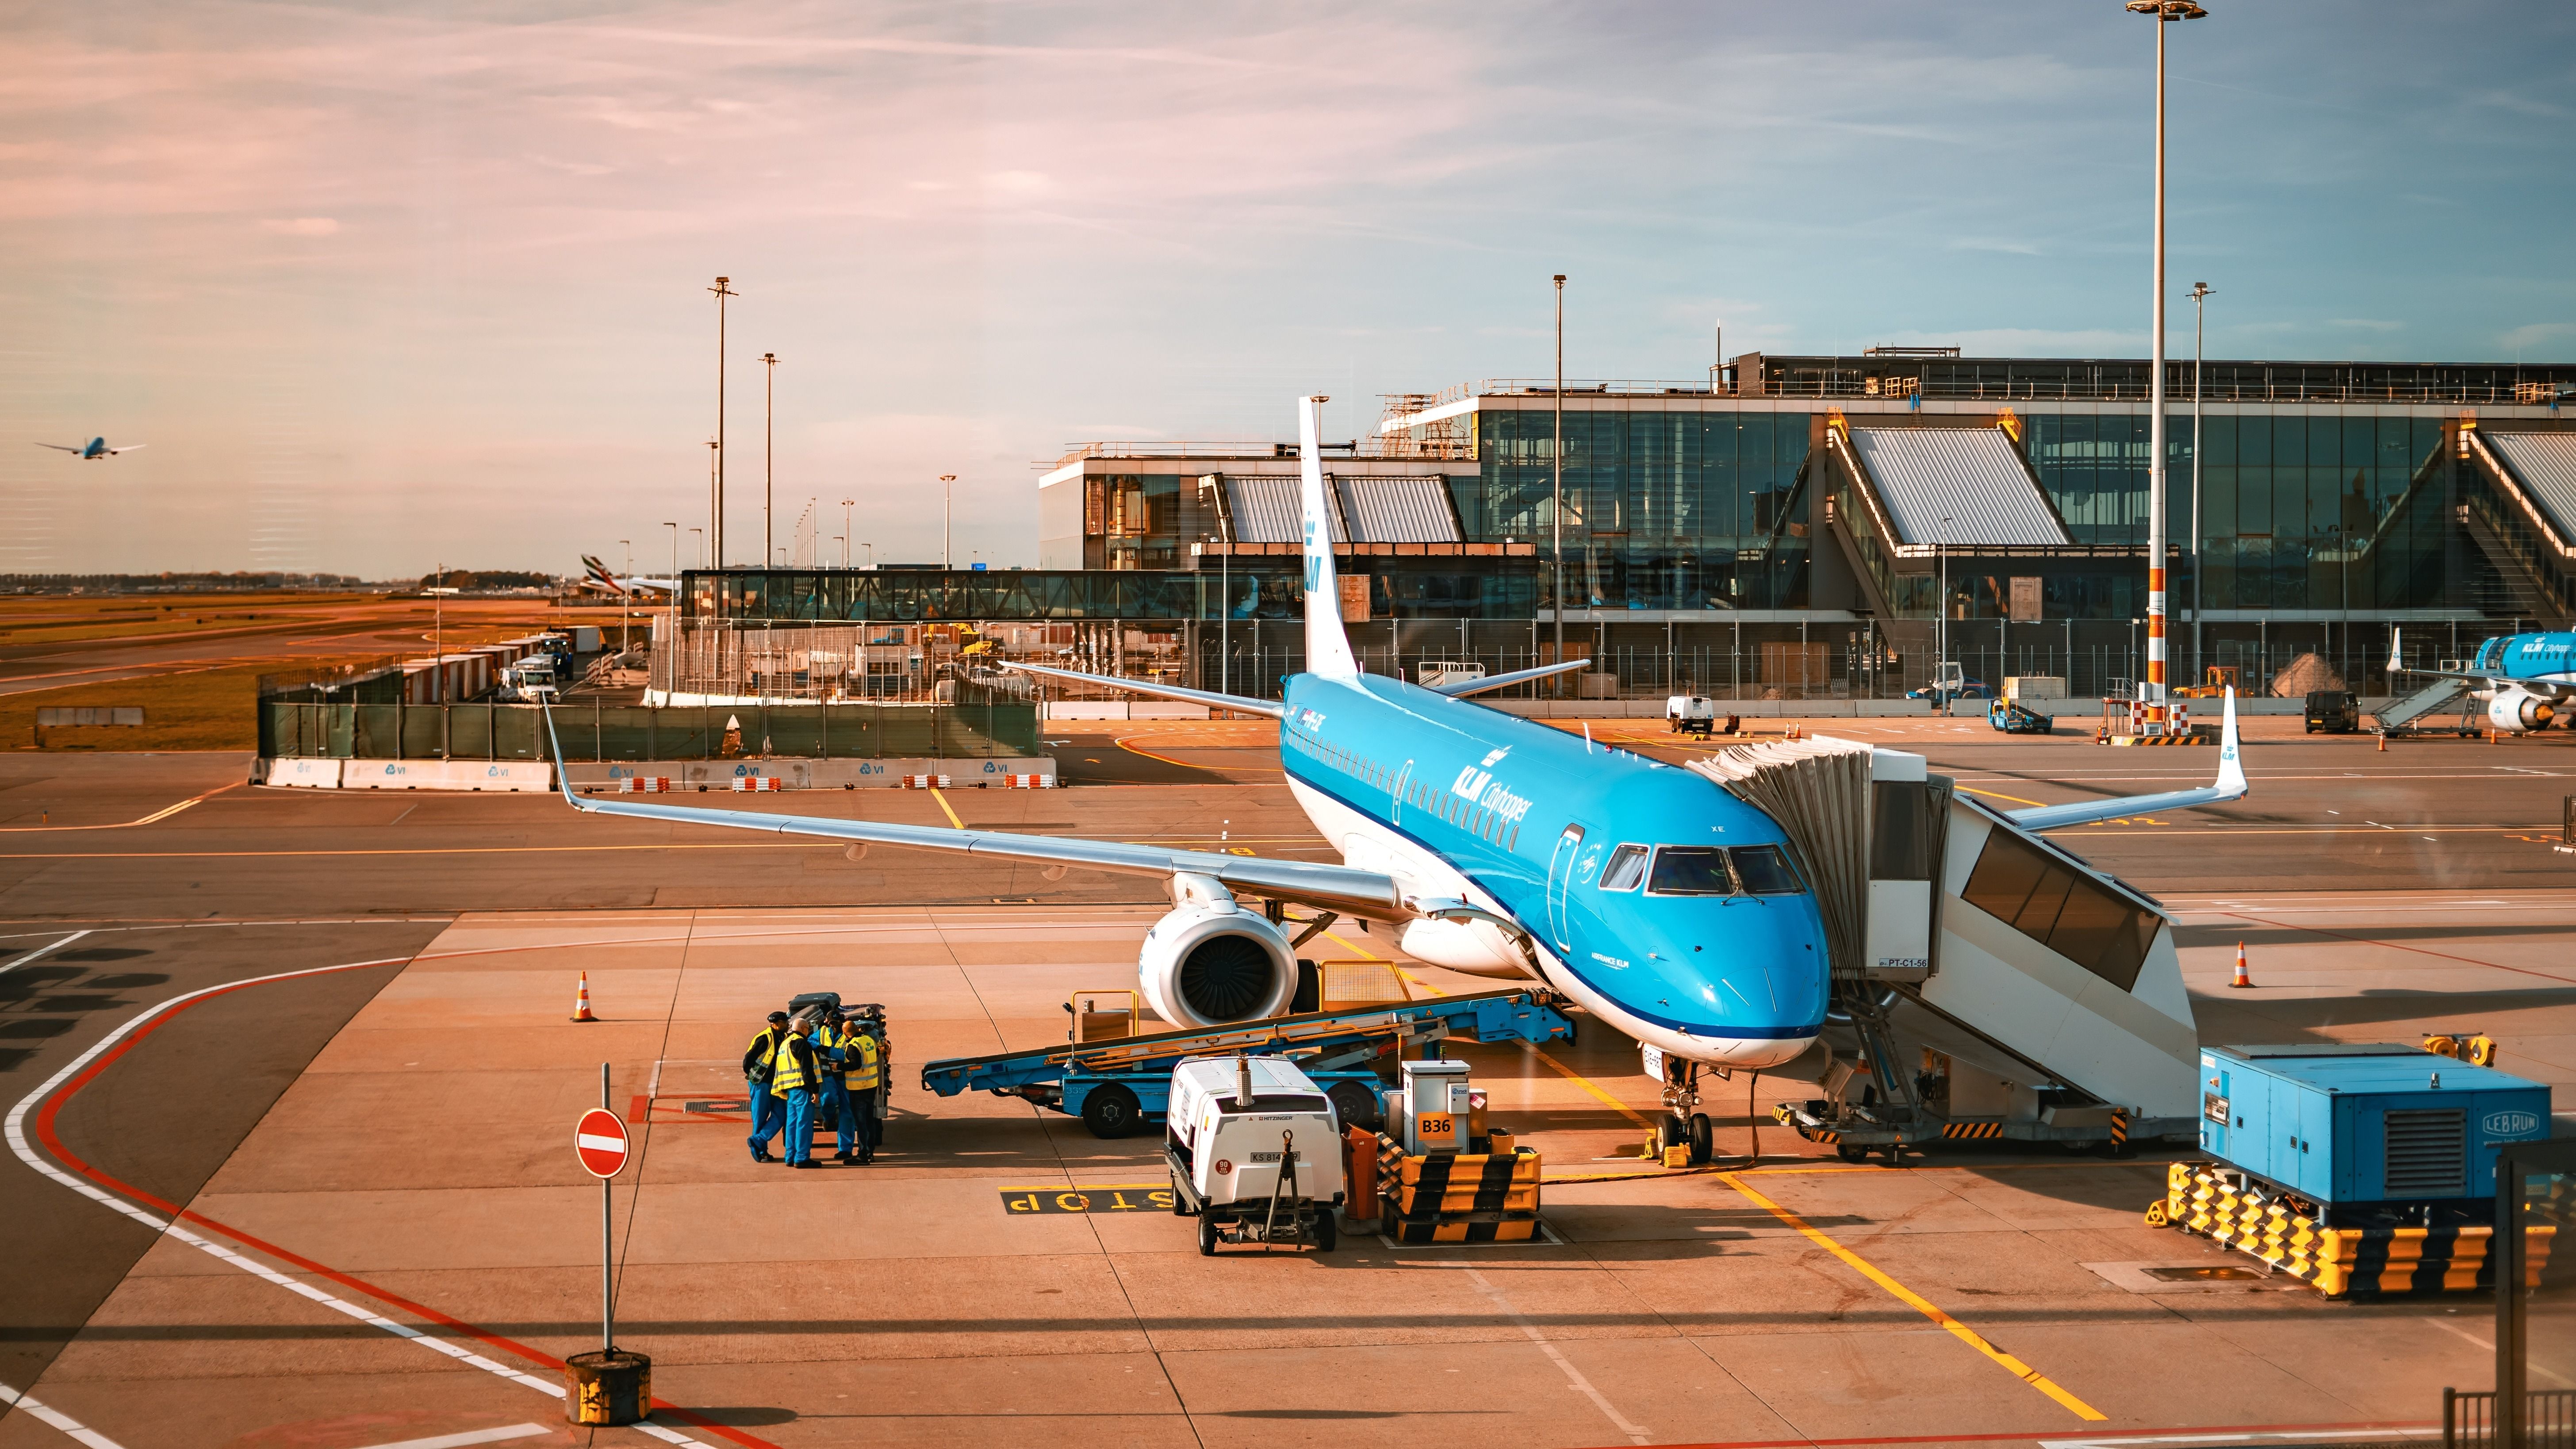 A KLM aircraft parked at an air stand.